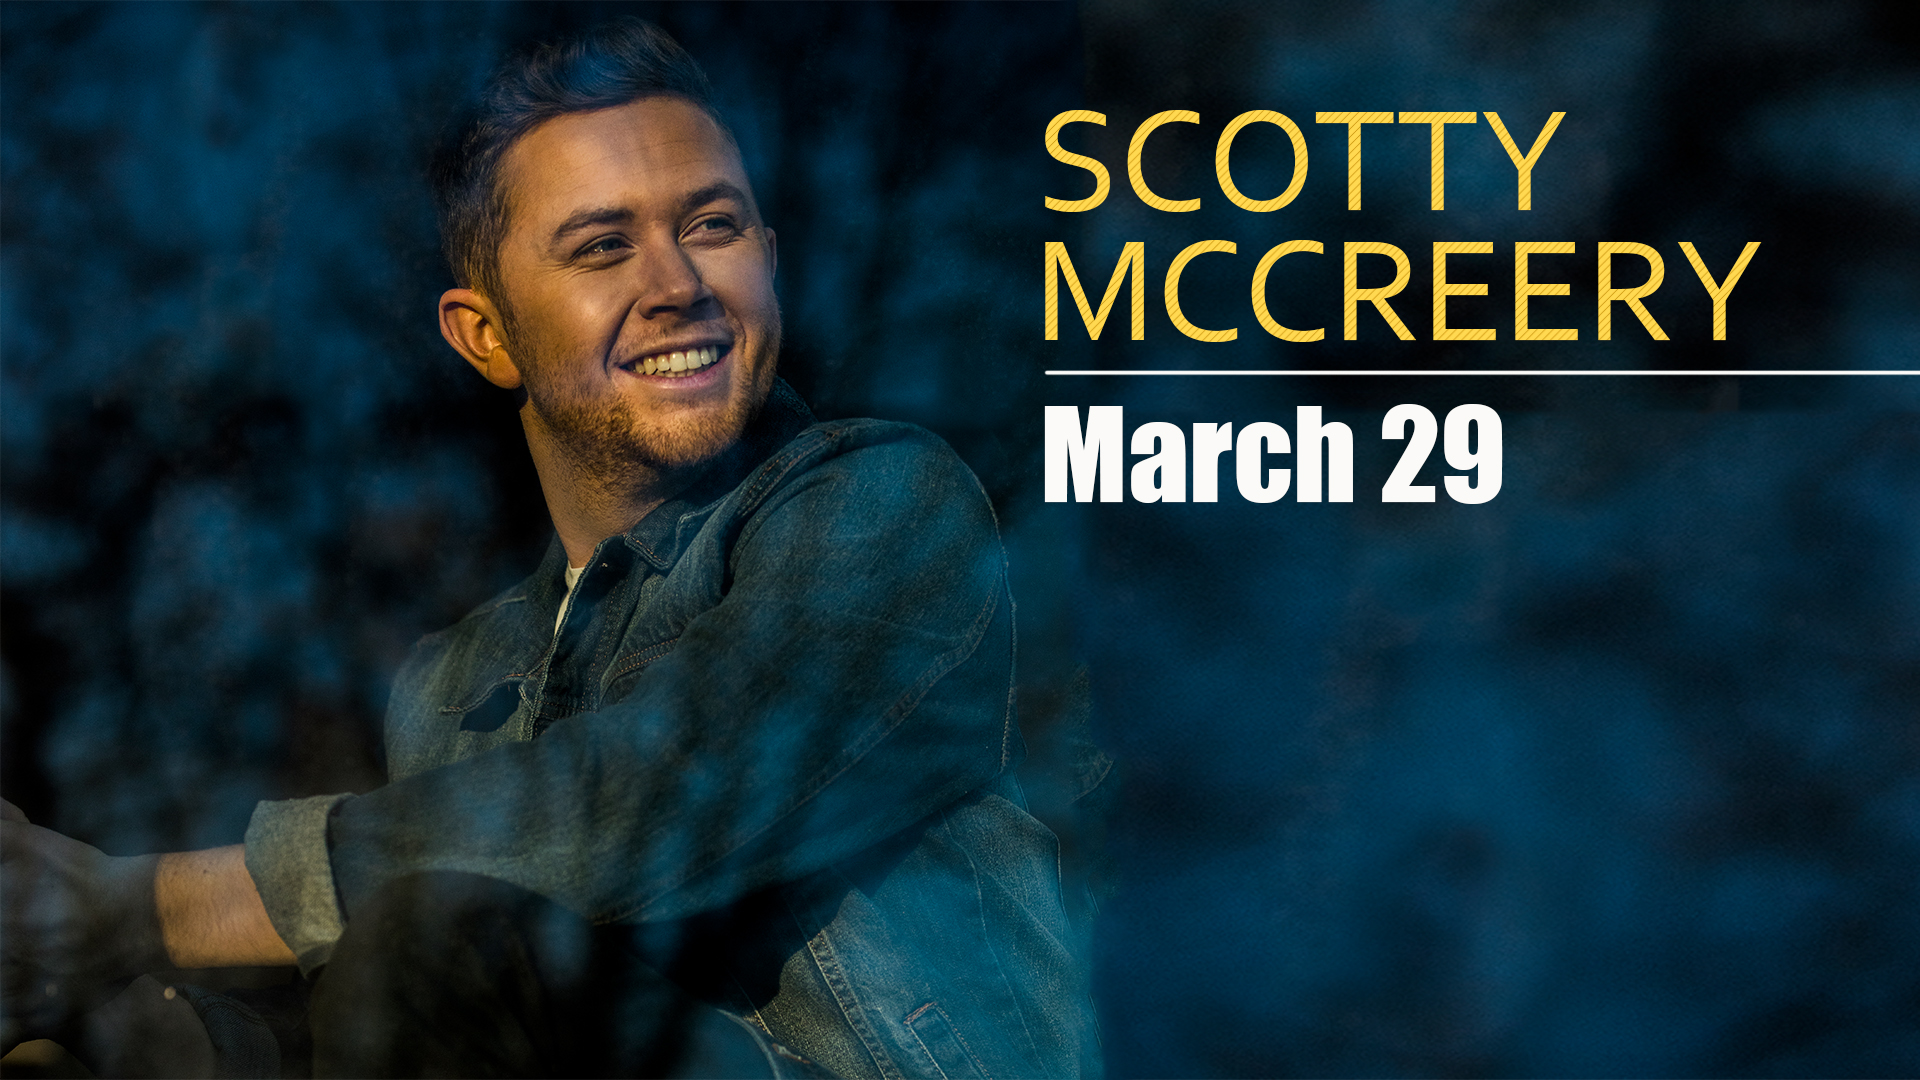 Scotty McCreery March 29 concert photo